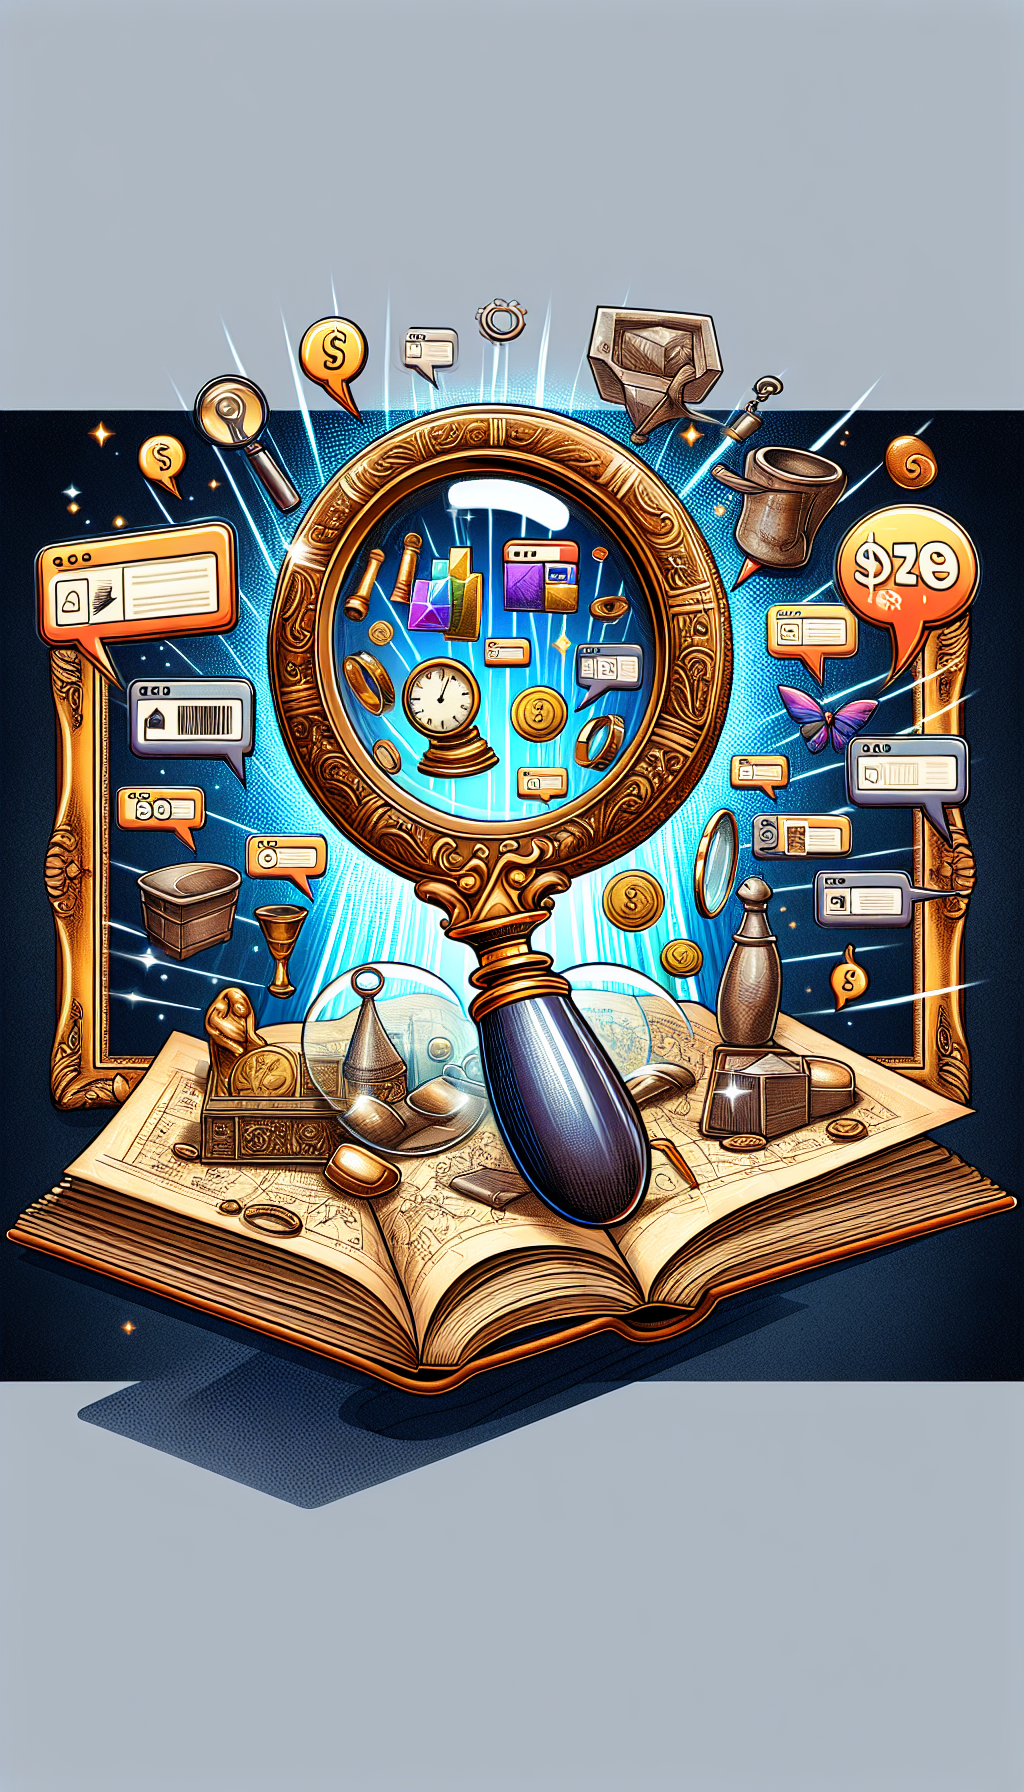 An illustration showcases an antique magnifying glass hovering above a classic treasure map that unfurls into a digital screen with icons of top websites. Glimmering artifacts from various eras border the screen, with speech bubbles containing price tags popping up, symbolizing free online appraisals. The blending of vintage cartography with digital elements represents the fusion of past and present in no-cost antique evaluations.